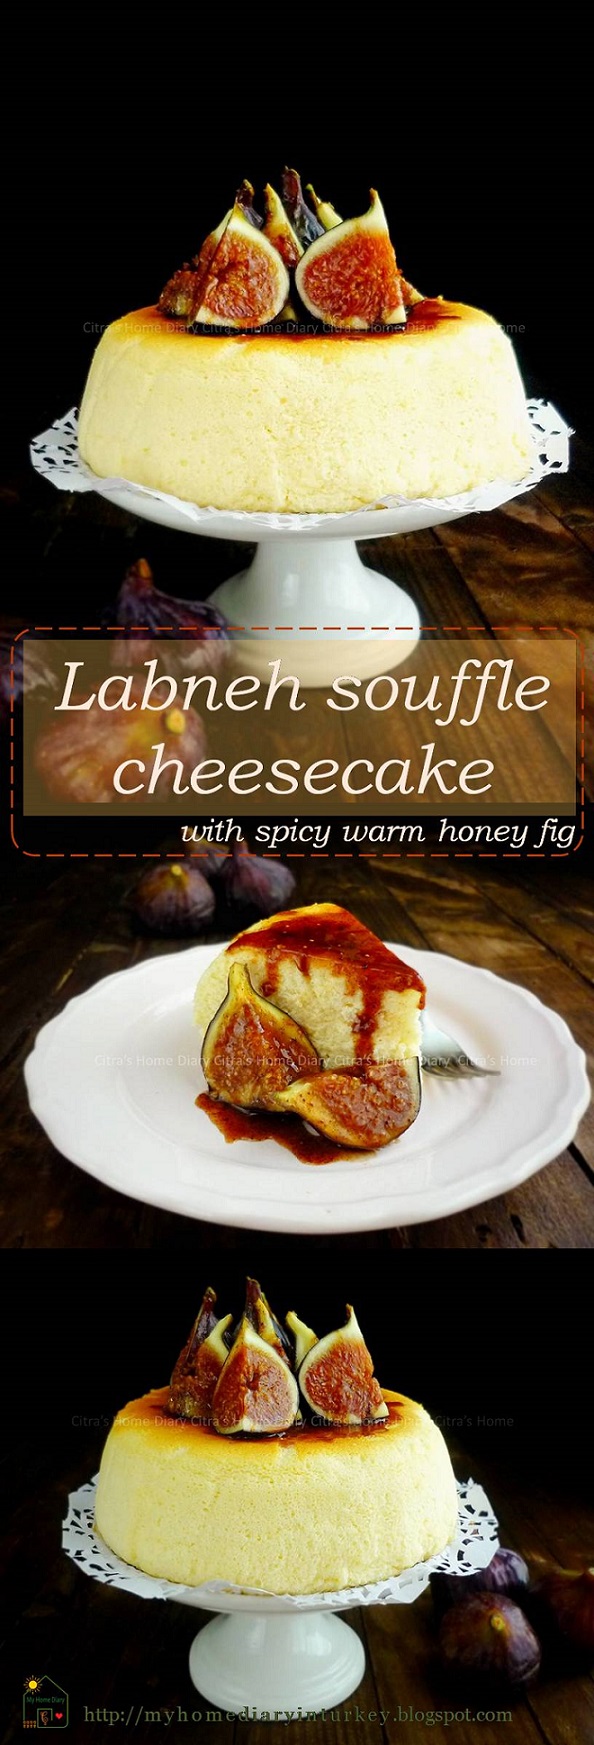 Labneh (strained yogurt) souffle cheesecake with spicy warm honey fig. To get this labneh, you need to drain/ strain plain thick yogurt at least over night or until 24 hour. Keep it inside refrigerator while you drain your yogurt. Use cheese cloth and put on sieve with a bowl for dropping whey underneath. #labneh #creamcheese #healthycreamcheese  #cheesesoufflecake #fig  #spicybakedfig #dessert #soufflecake #citrashomediary #middleeastern #yoghurtdessert